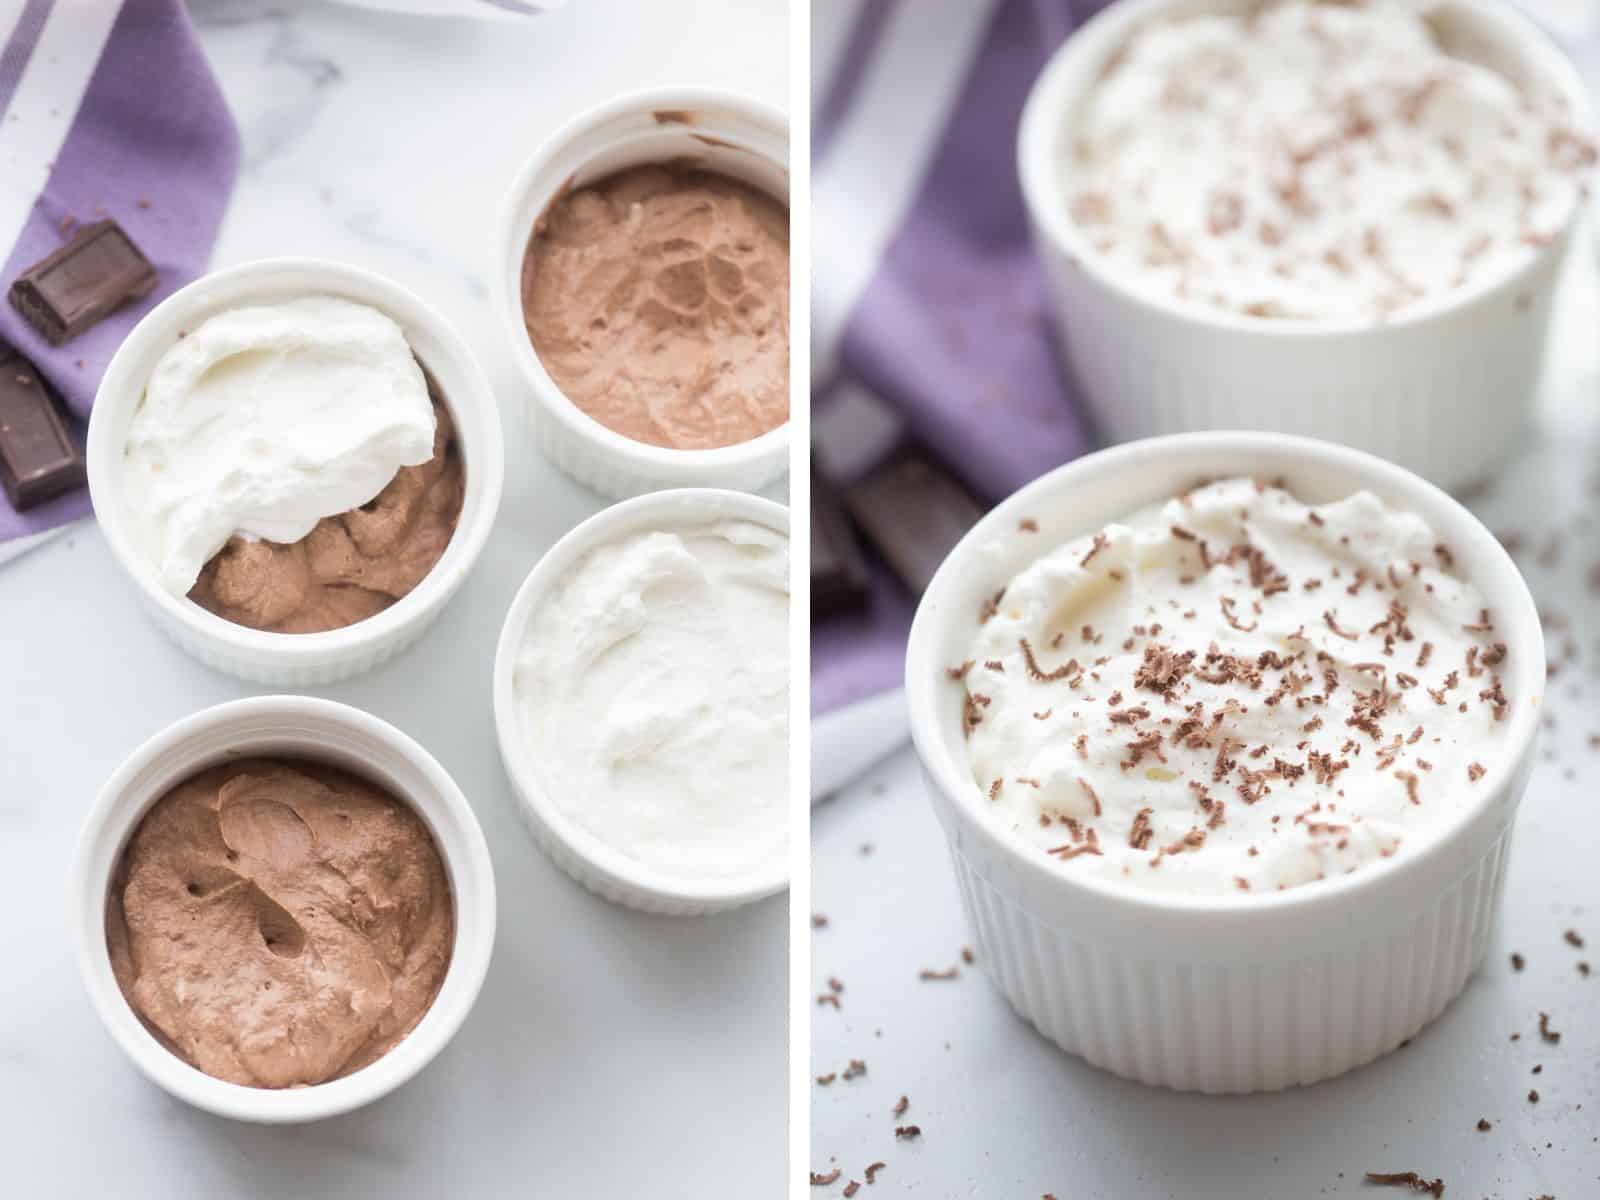 Collage image of assembled keto chocolate mousse in white ramekins